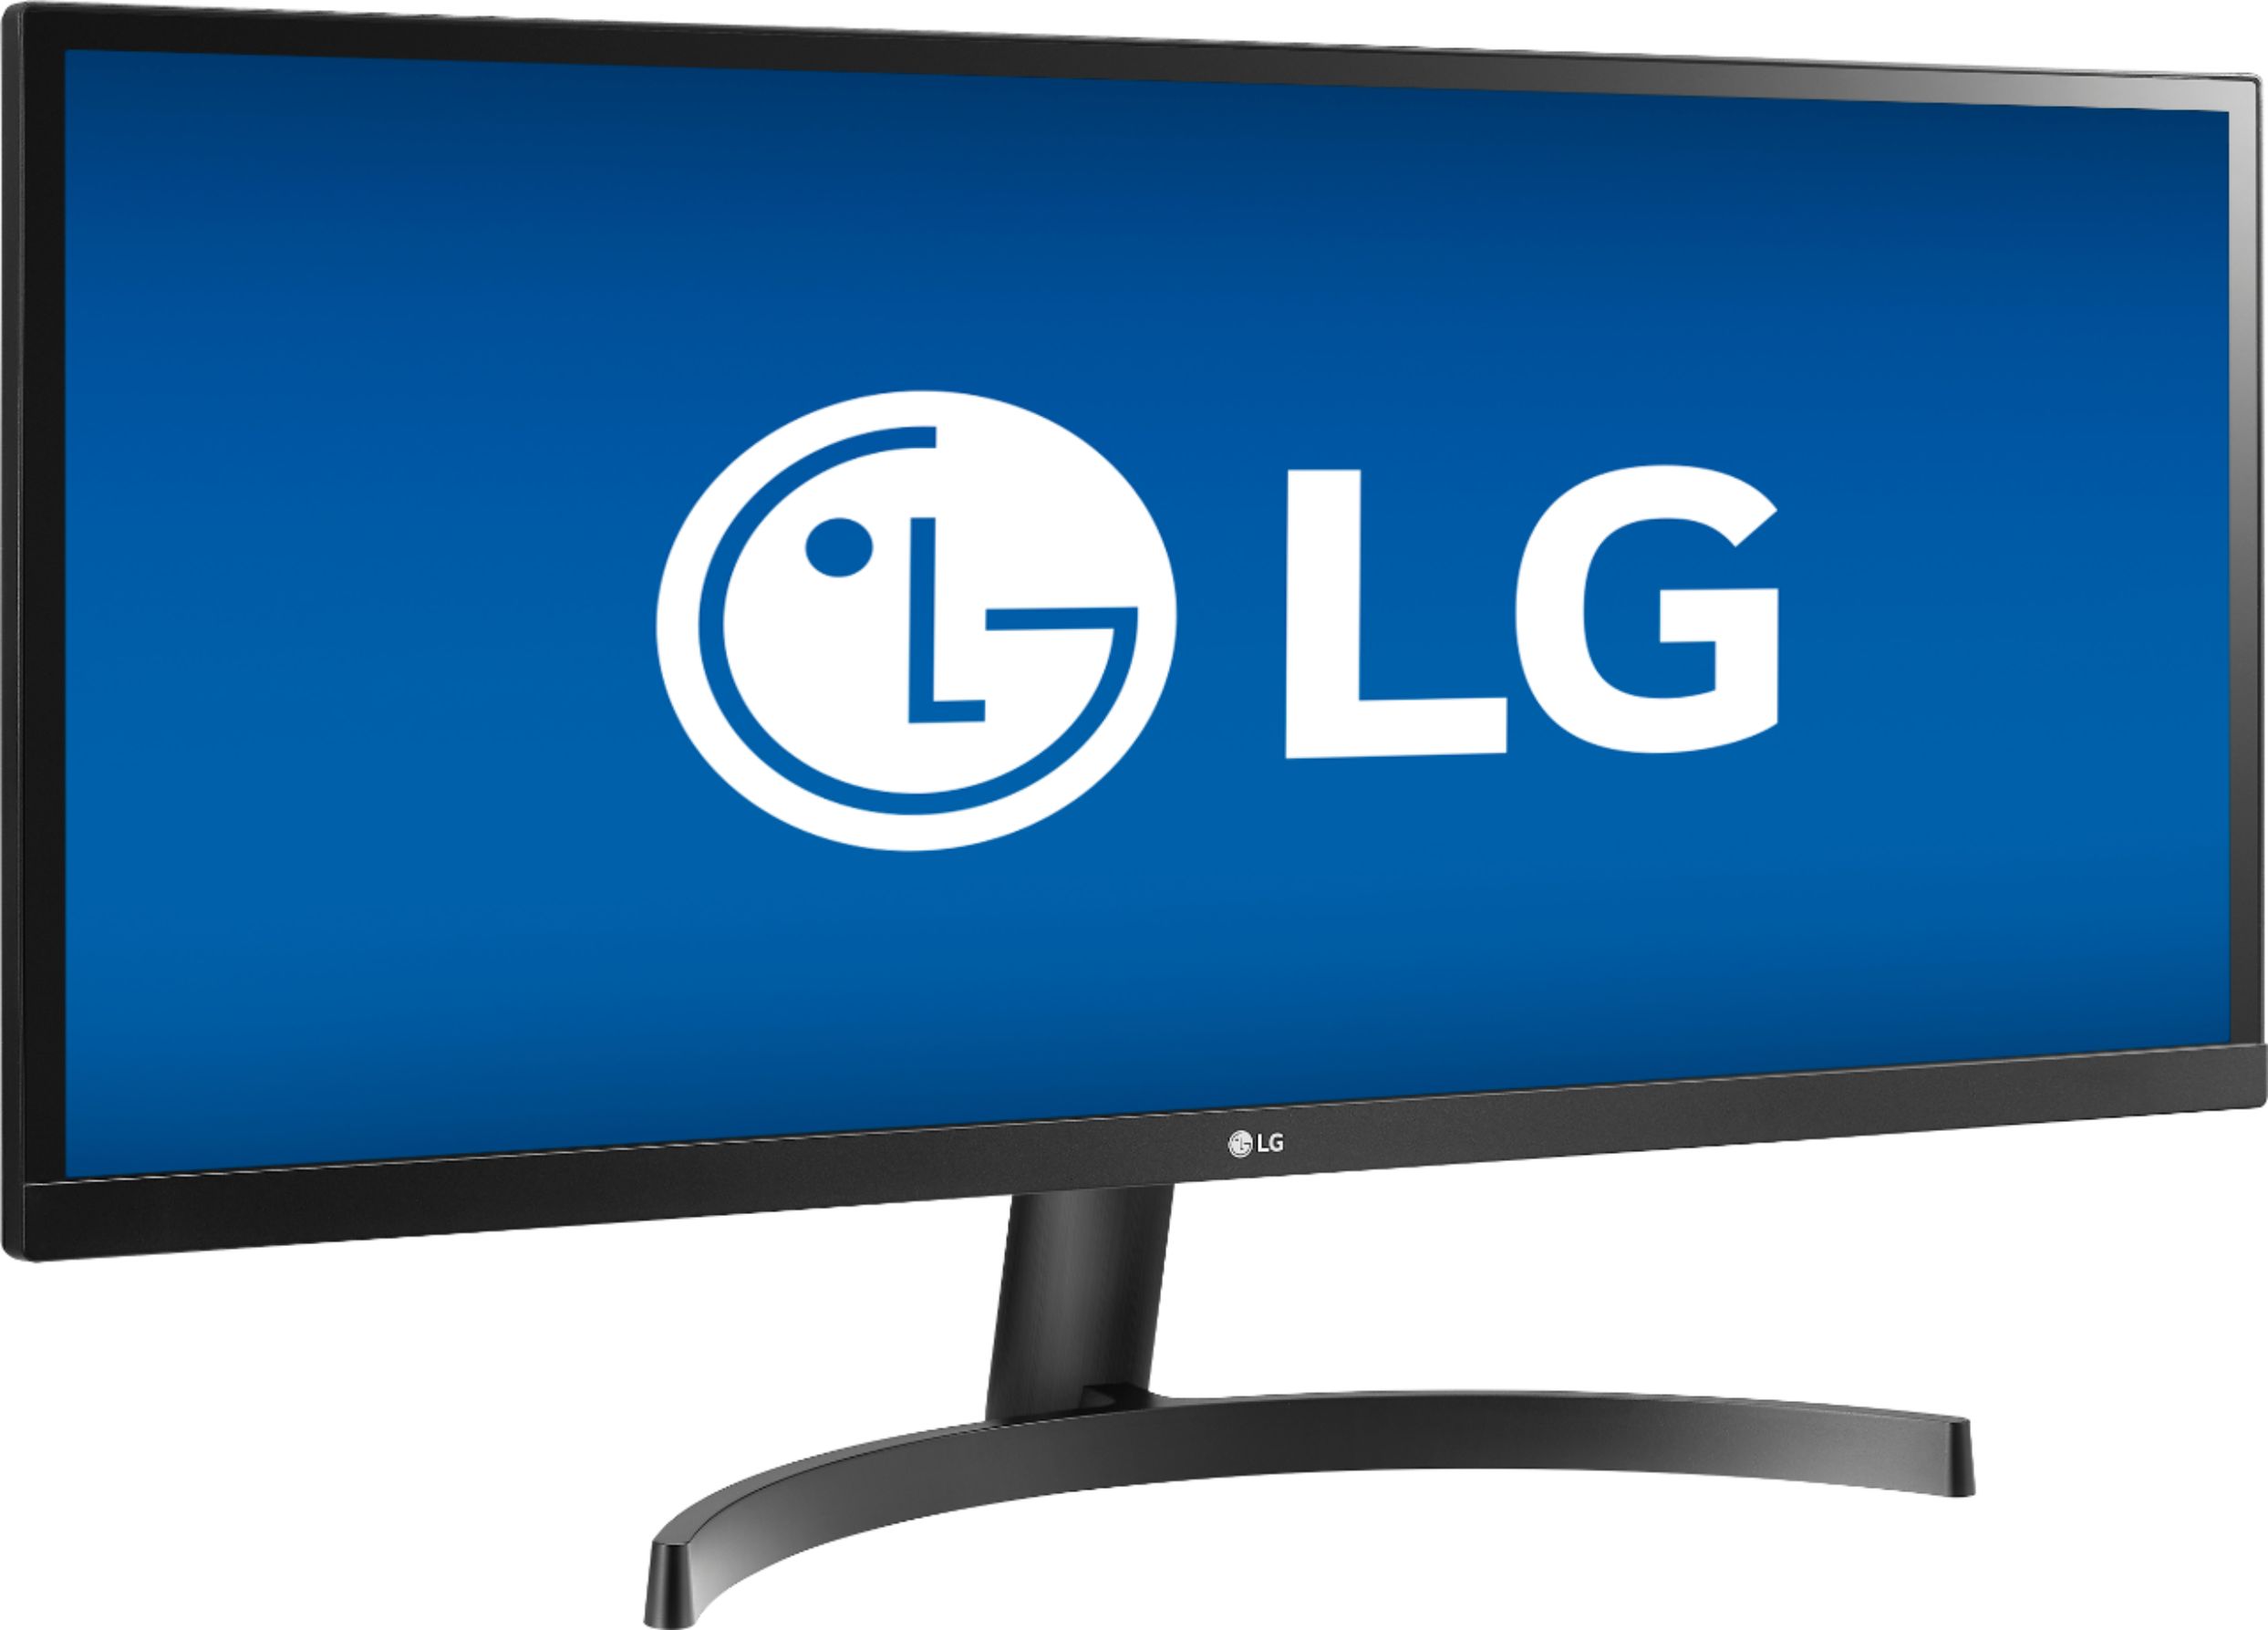 Angle View: LG - 34WL500-B 34" IPS LED UltraWide FHD FreeSync Monitor with HDR (HDMI) - Black